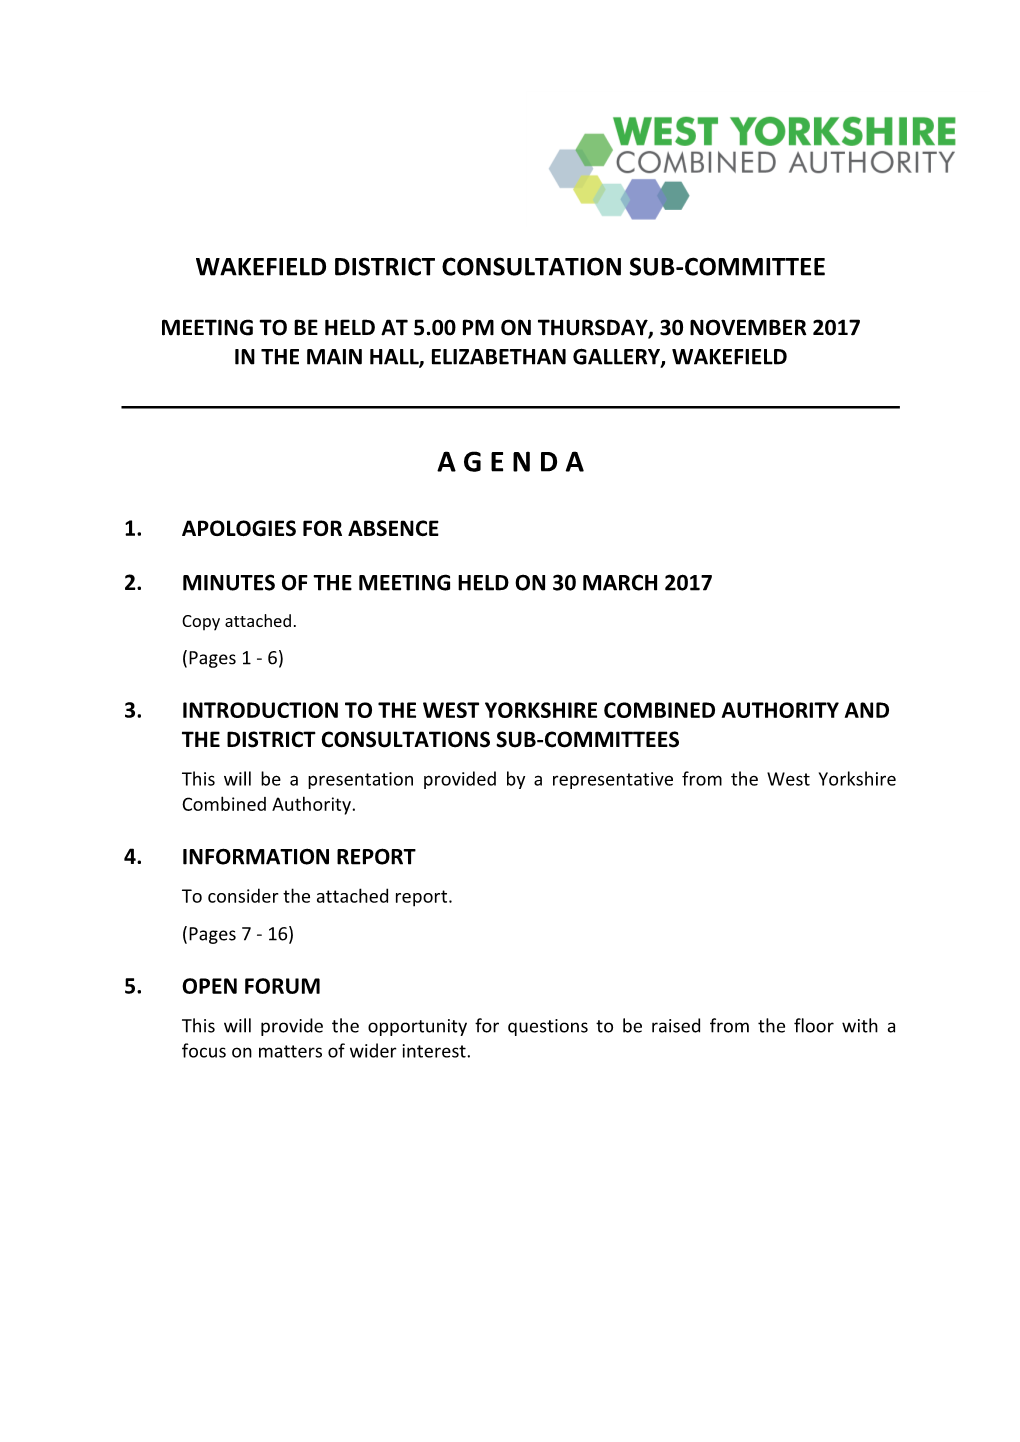 (Public Pack)Agenda Document for Wakefield District Consultation Sub-Committee, 30/11/2017 17:00